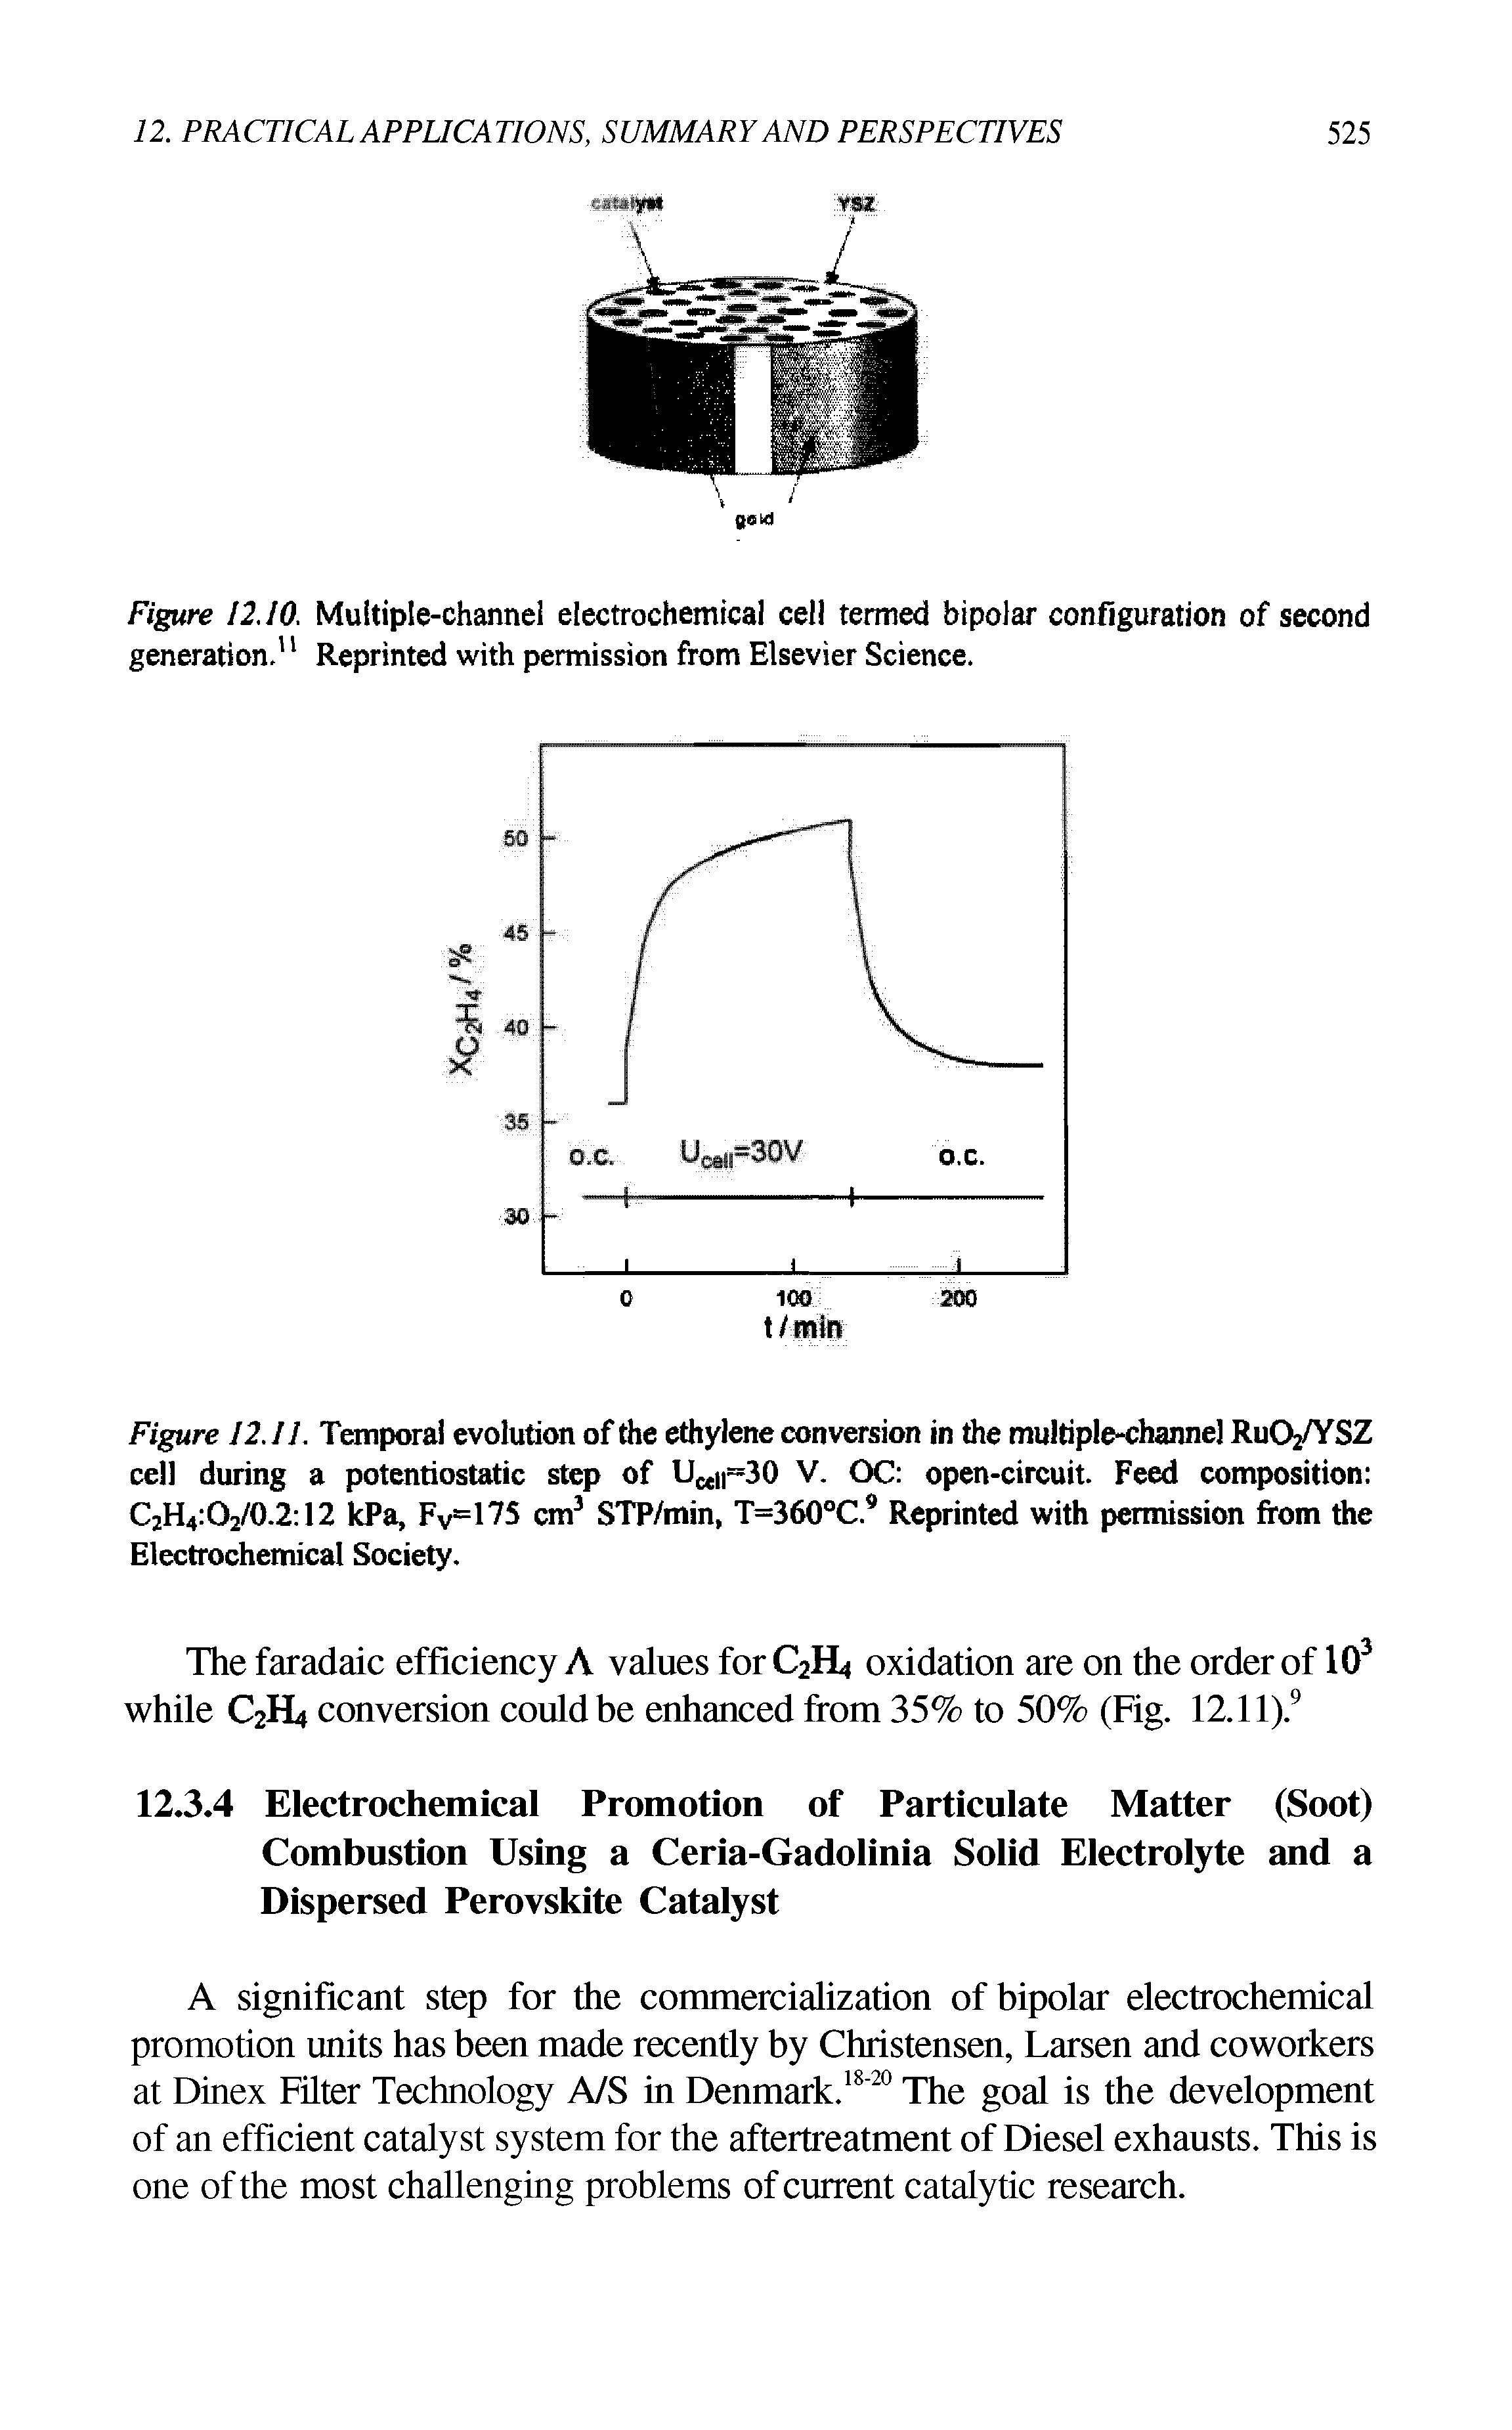 Figure 12.11. Temporal evolution of the ethylene conversion in the multiple-channel Ru02/YSZ cell during a potentiostatic step of UM =30 V. OC open-circuit. Feed composition C2H4 O2/0.2 12 kPa, Fv=175 cm3 STP/min, T=360°C.9 Reprinted with permission from the Electrochemical Society.